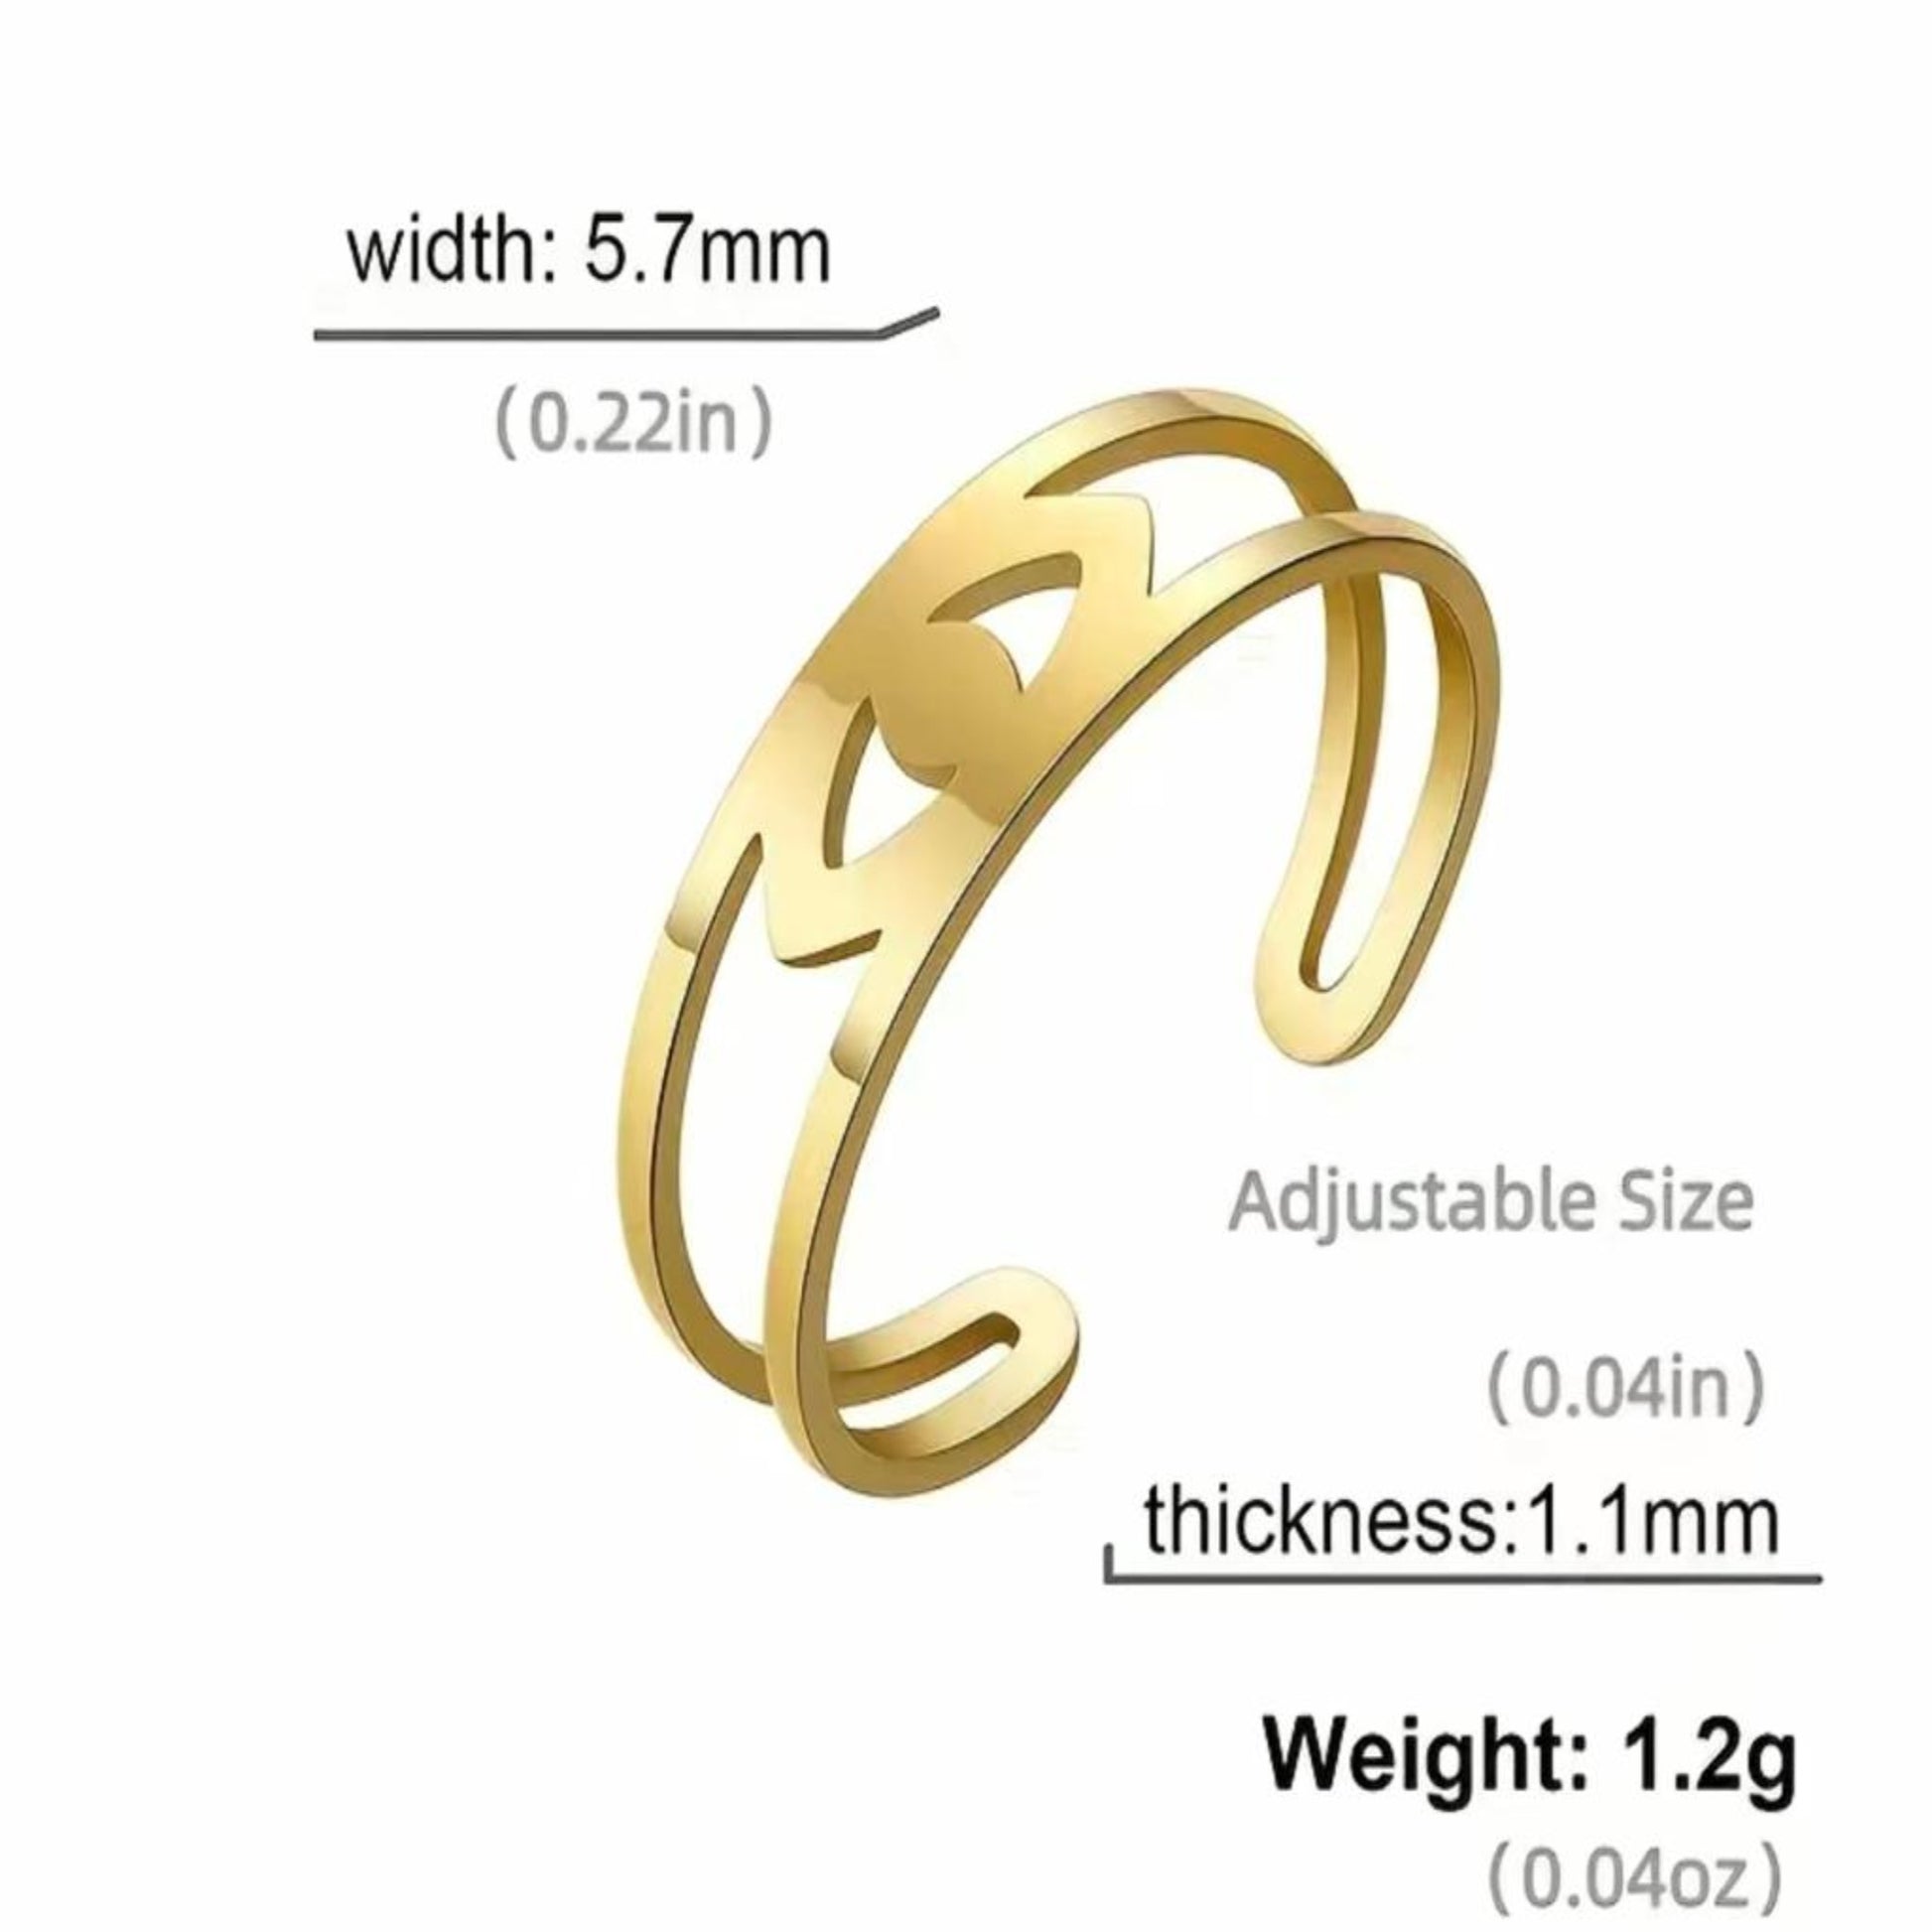 SINEAD 18K Gold-Plated Adjustable Ring